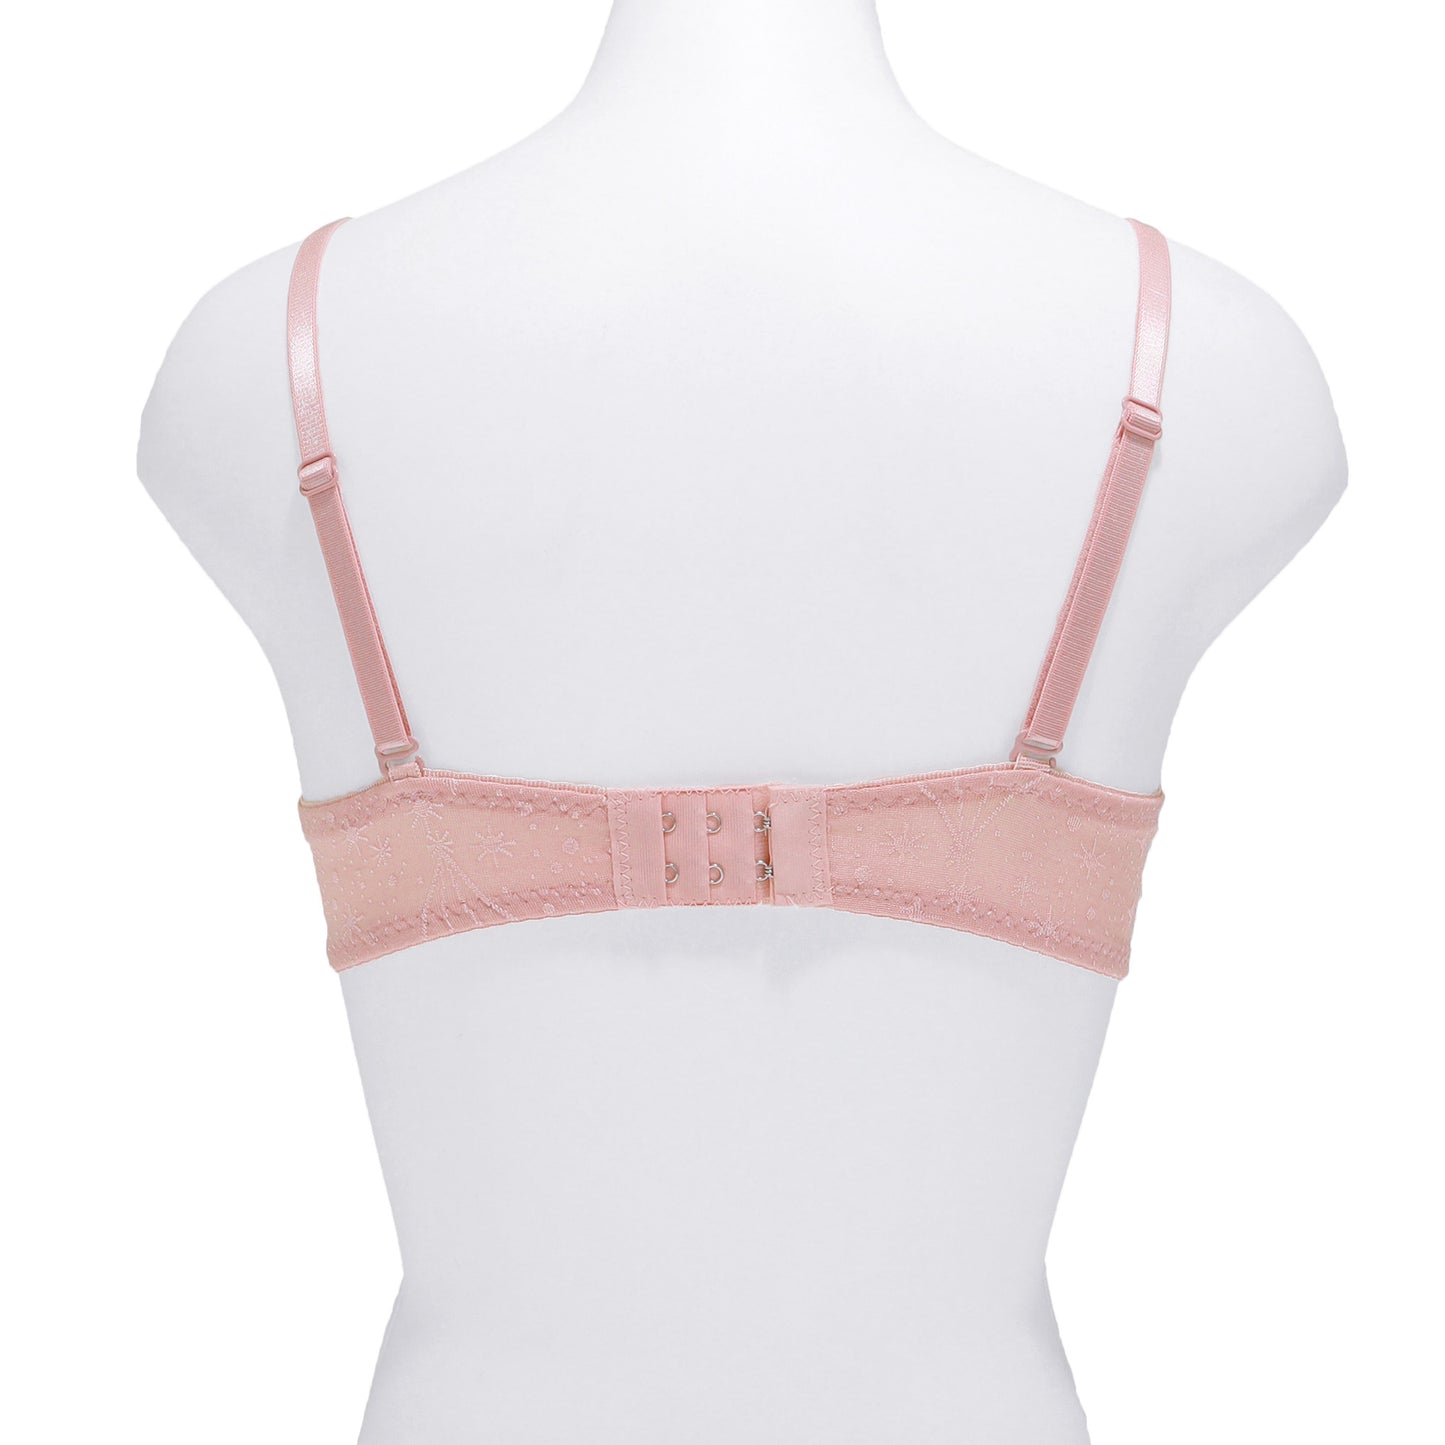 Wired A-Cup Bras with Embroidered Diamond Design (6-Pack)